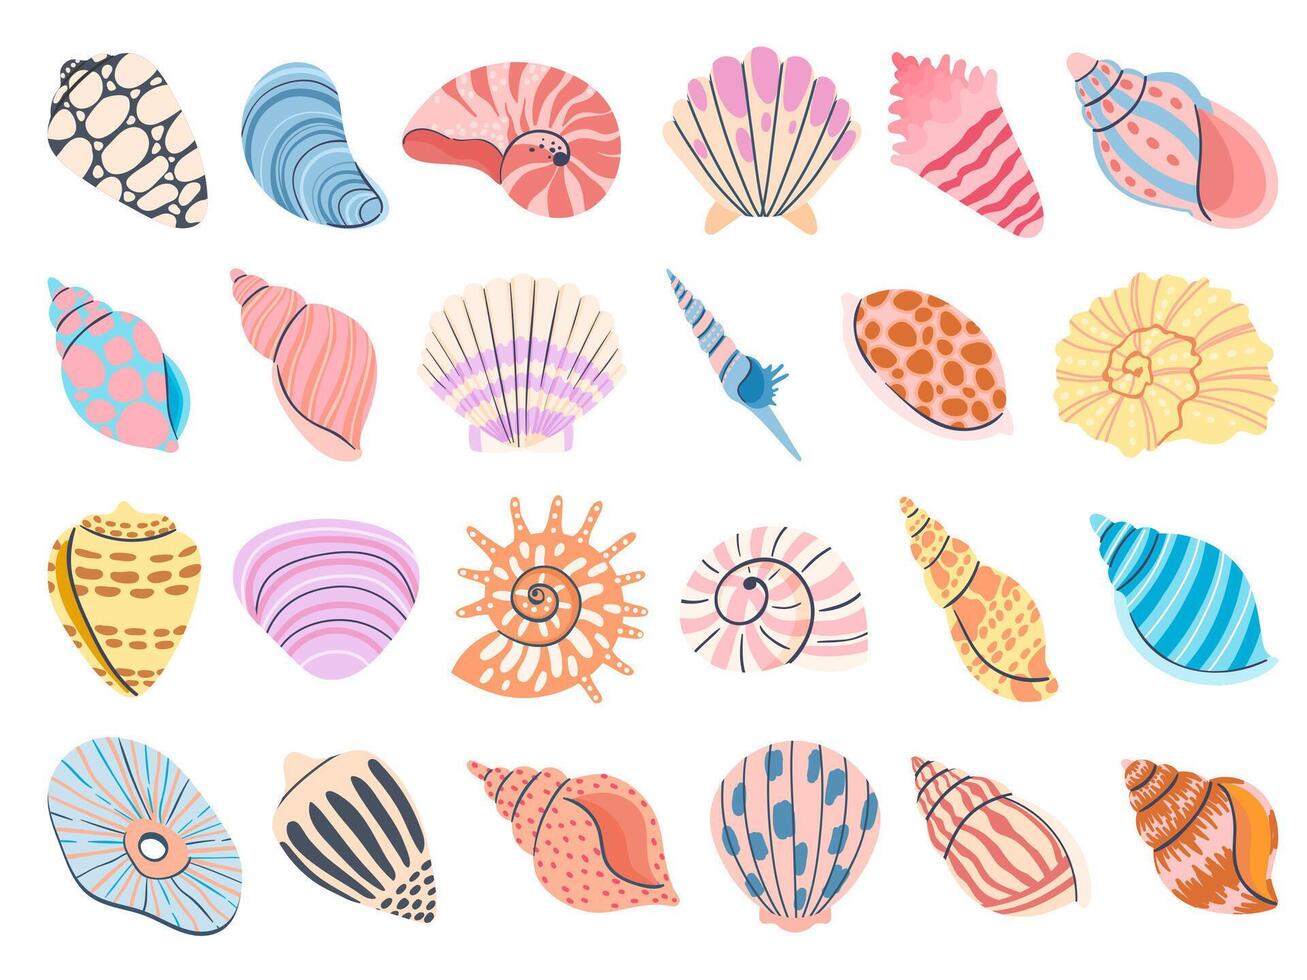 Tropical seashell. Cartoon clam, oyster and scallop shells. Colorful underwater conches of mollusk and sea snail. Ocean shellfish vector set